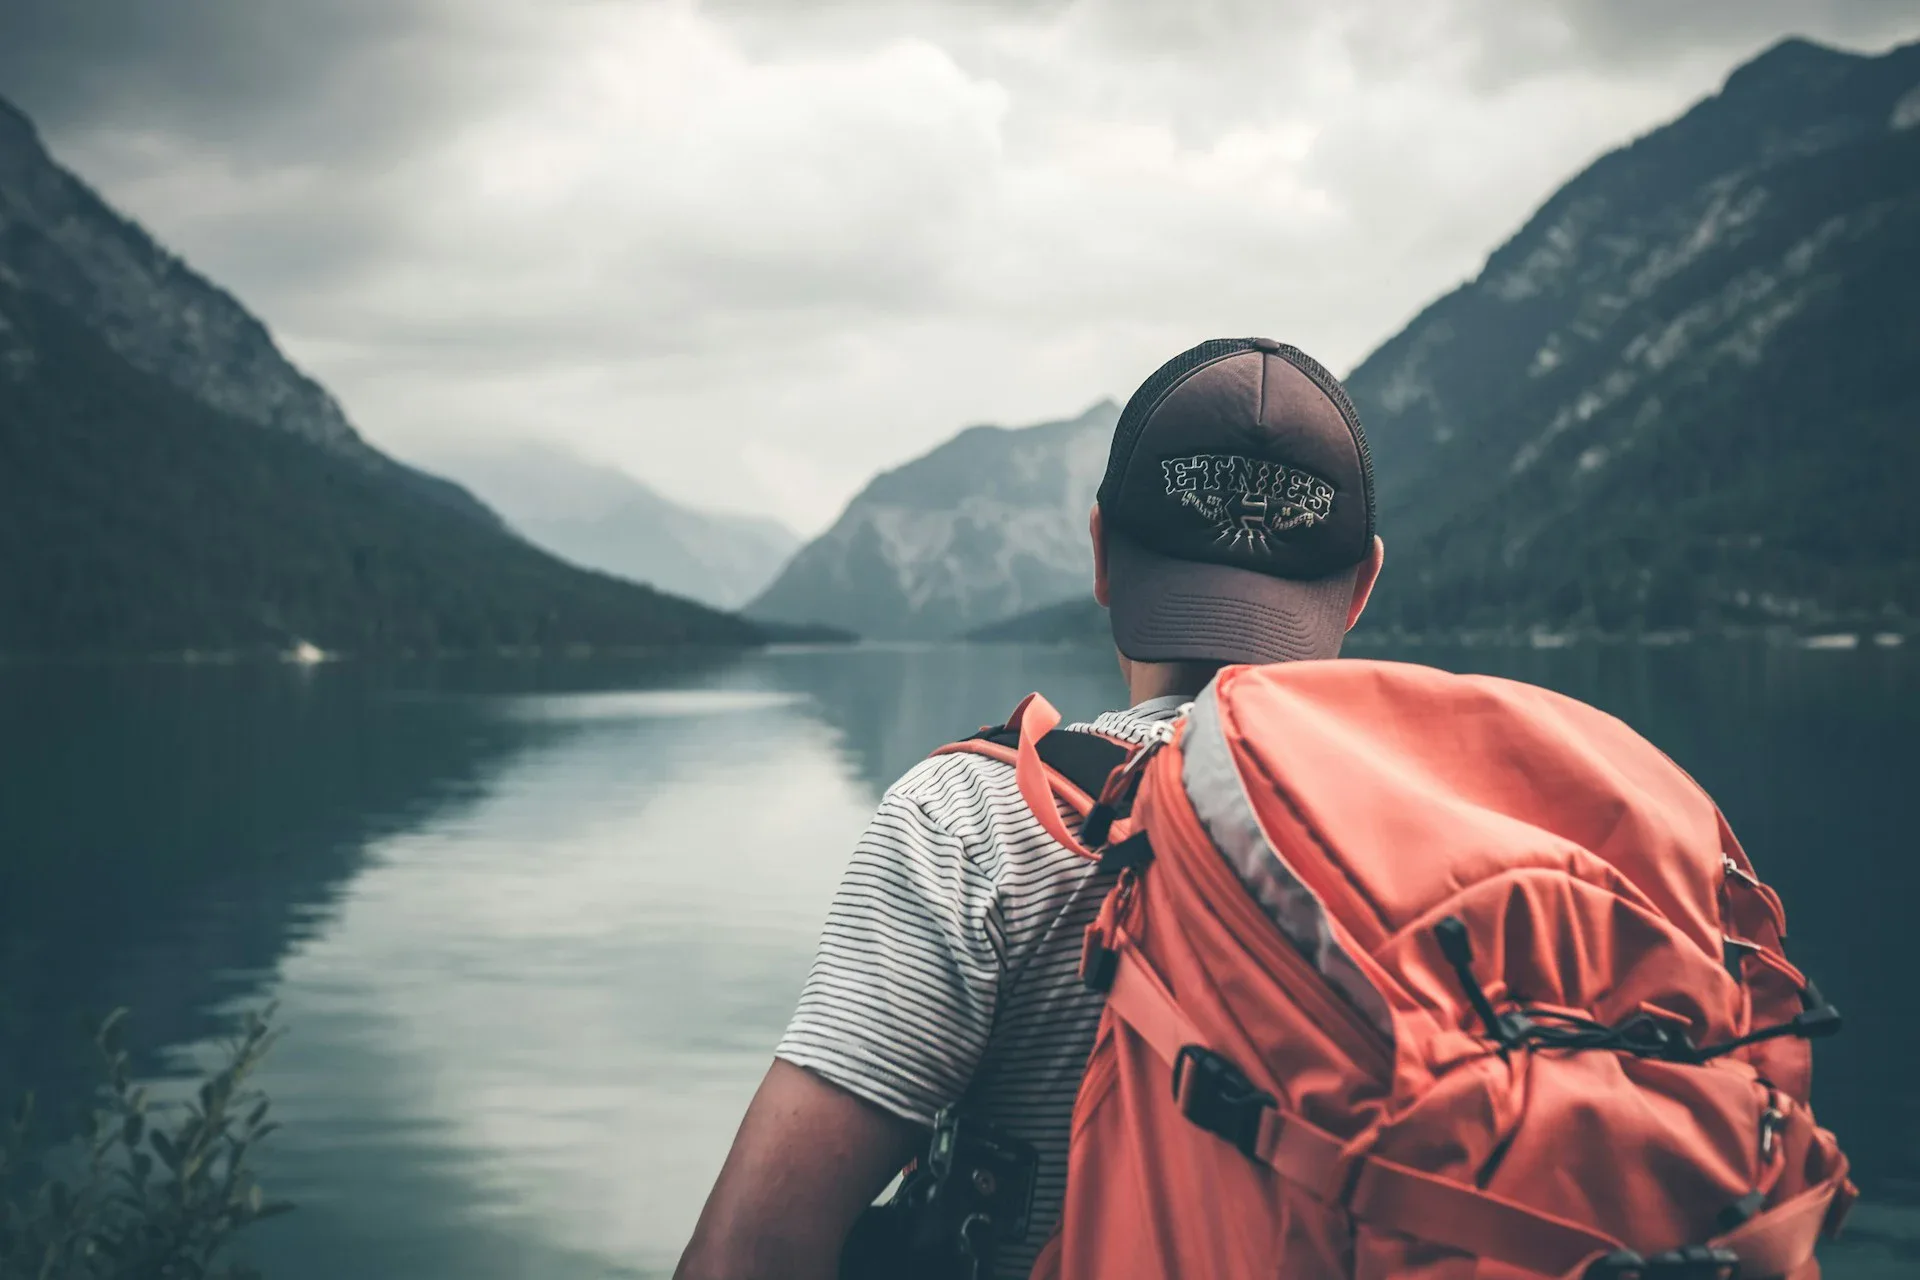 The guy stands with his back to the camera against the background of a lake and mountains.